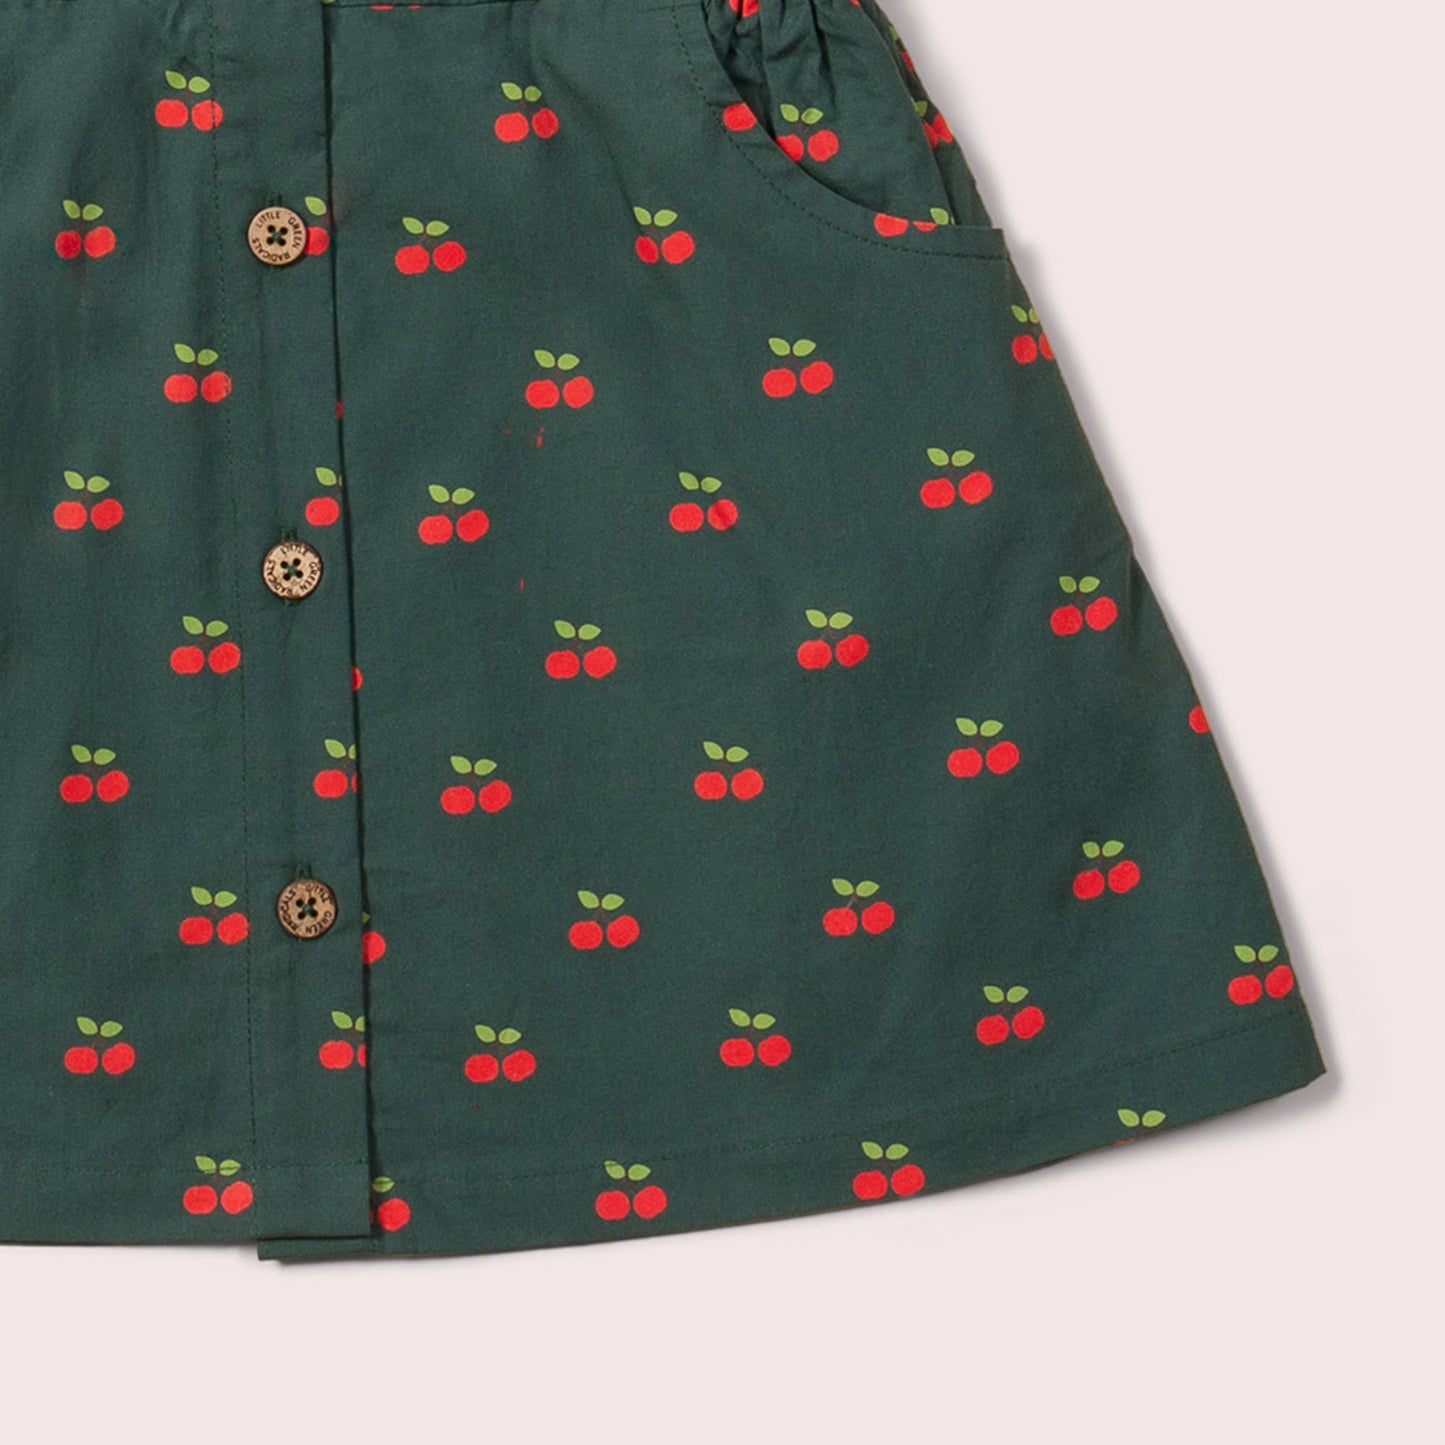 Cherries Buttons Short Sleeve Dress in Olive pocket and buttons detail